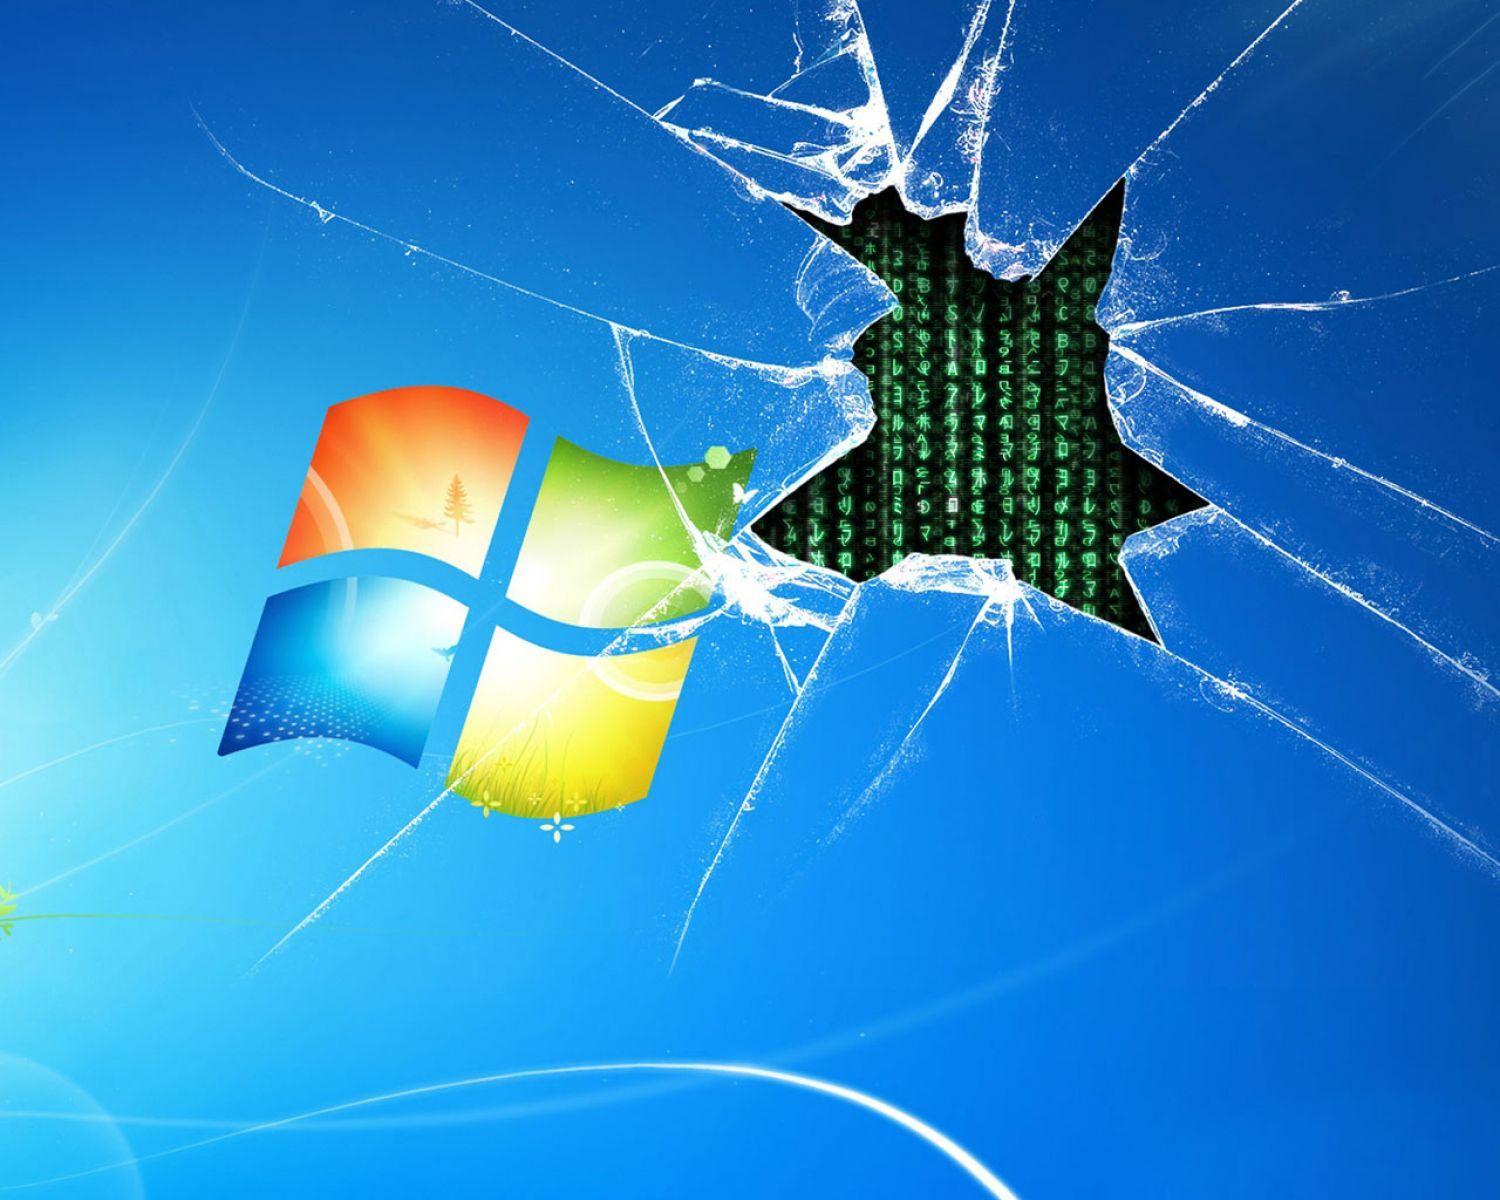 Windows 7 With Glass Break Effect. HD Brands and Logos Wallpaper